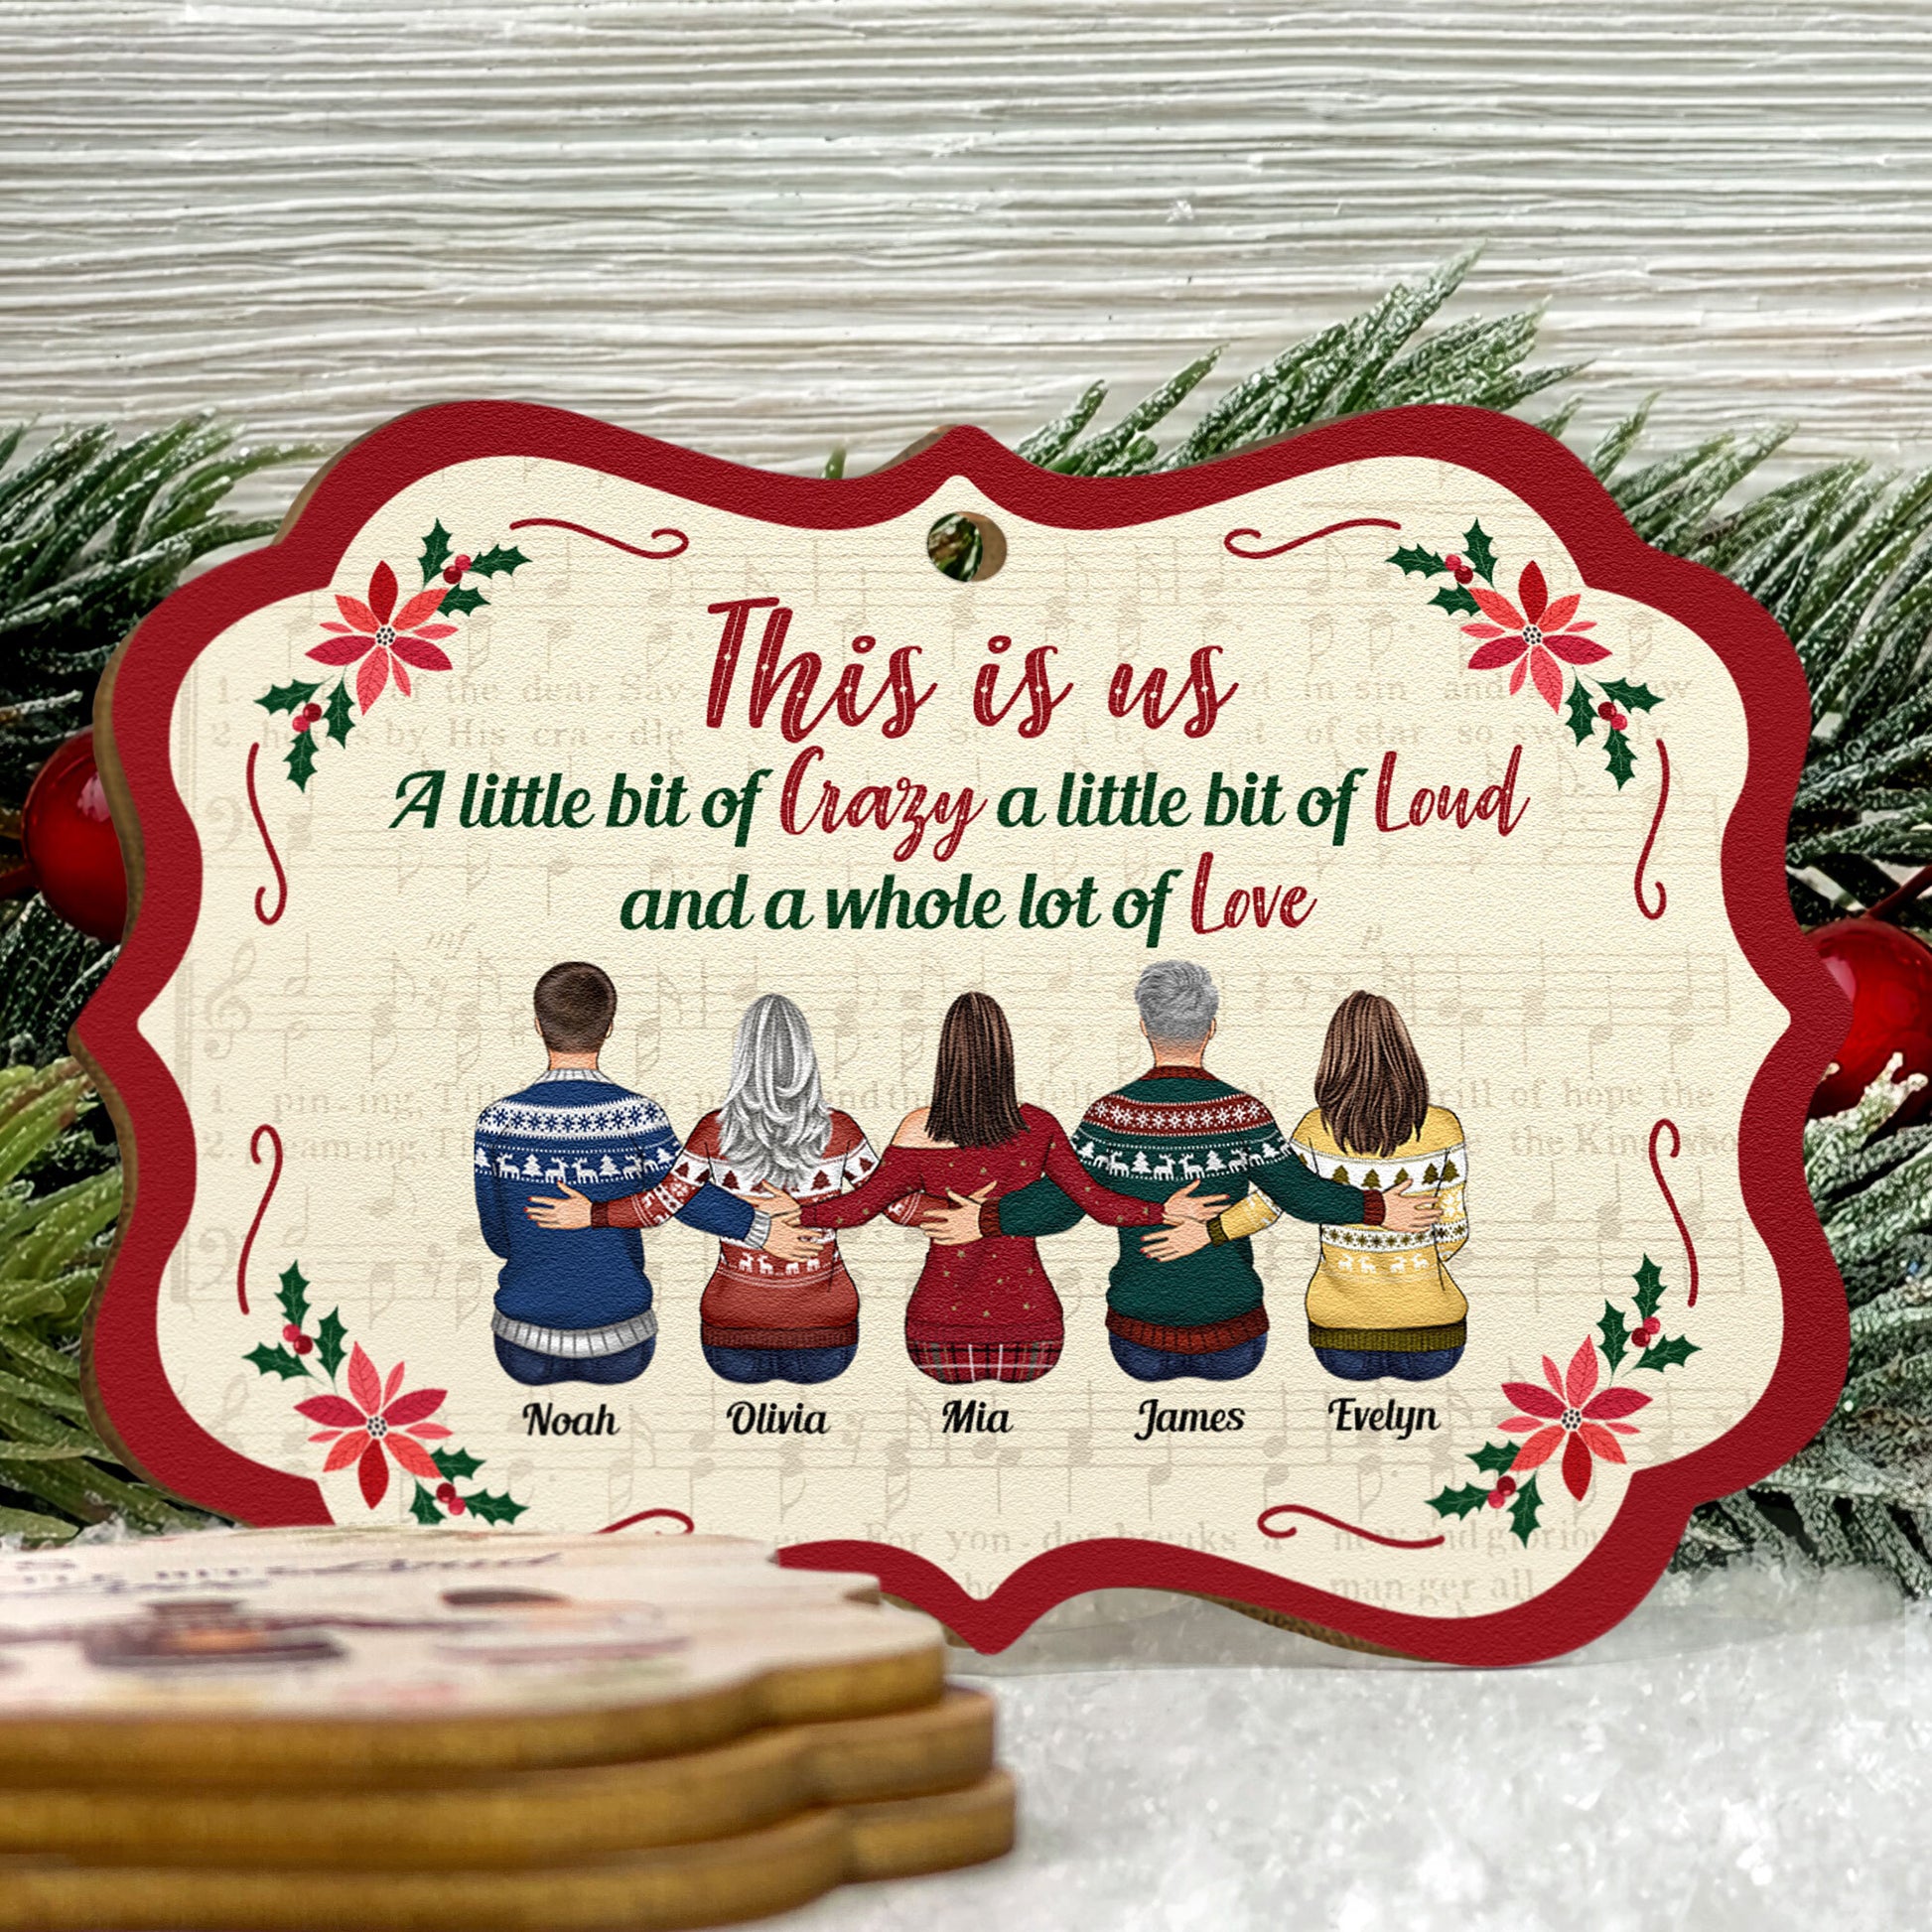 Our Family - Personalized Wooden Ornament - Christmas Gift For Family Members, Brothers, Sisters